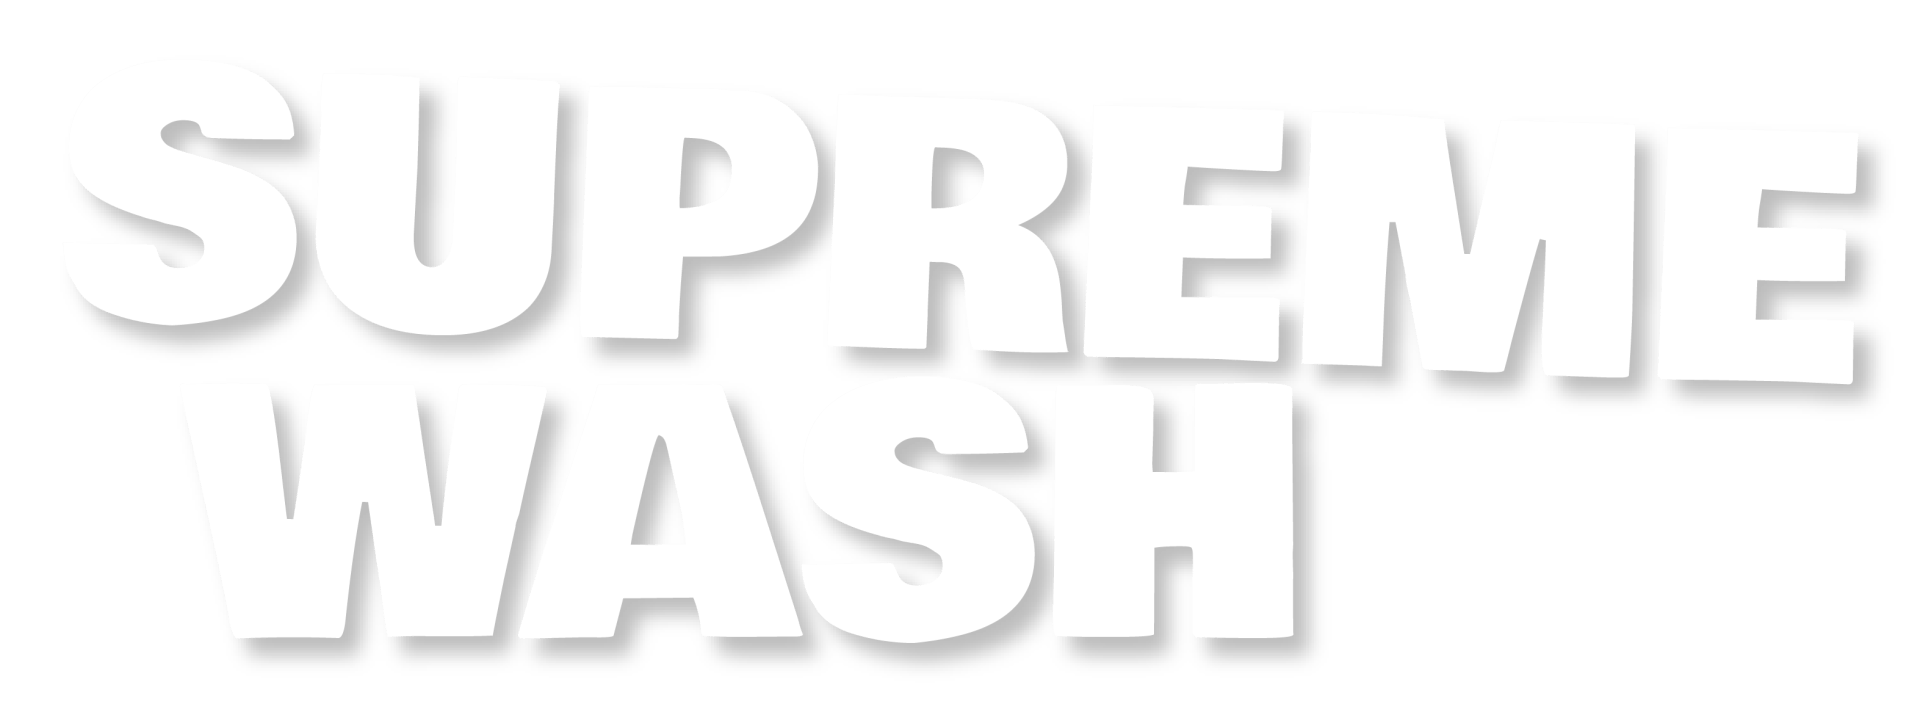 Supreme Wash Package $16 per wash or $43.98 monthly